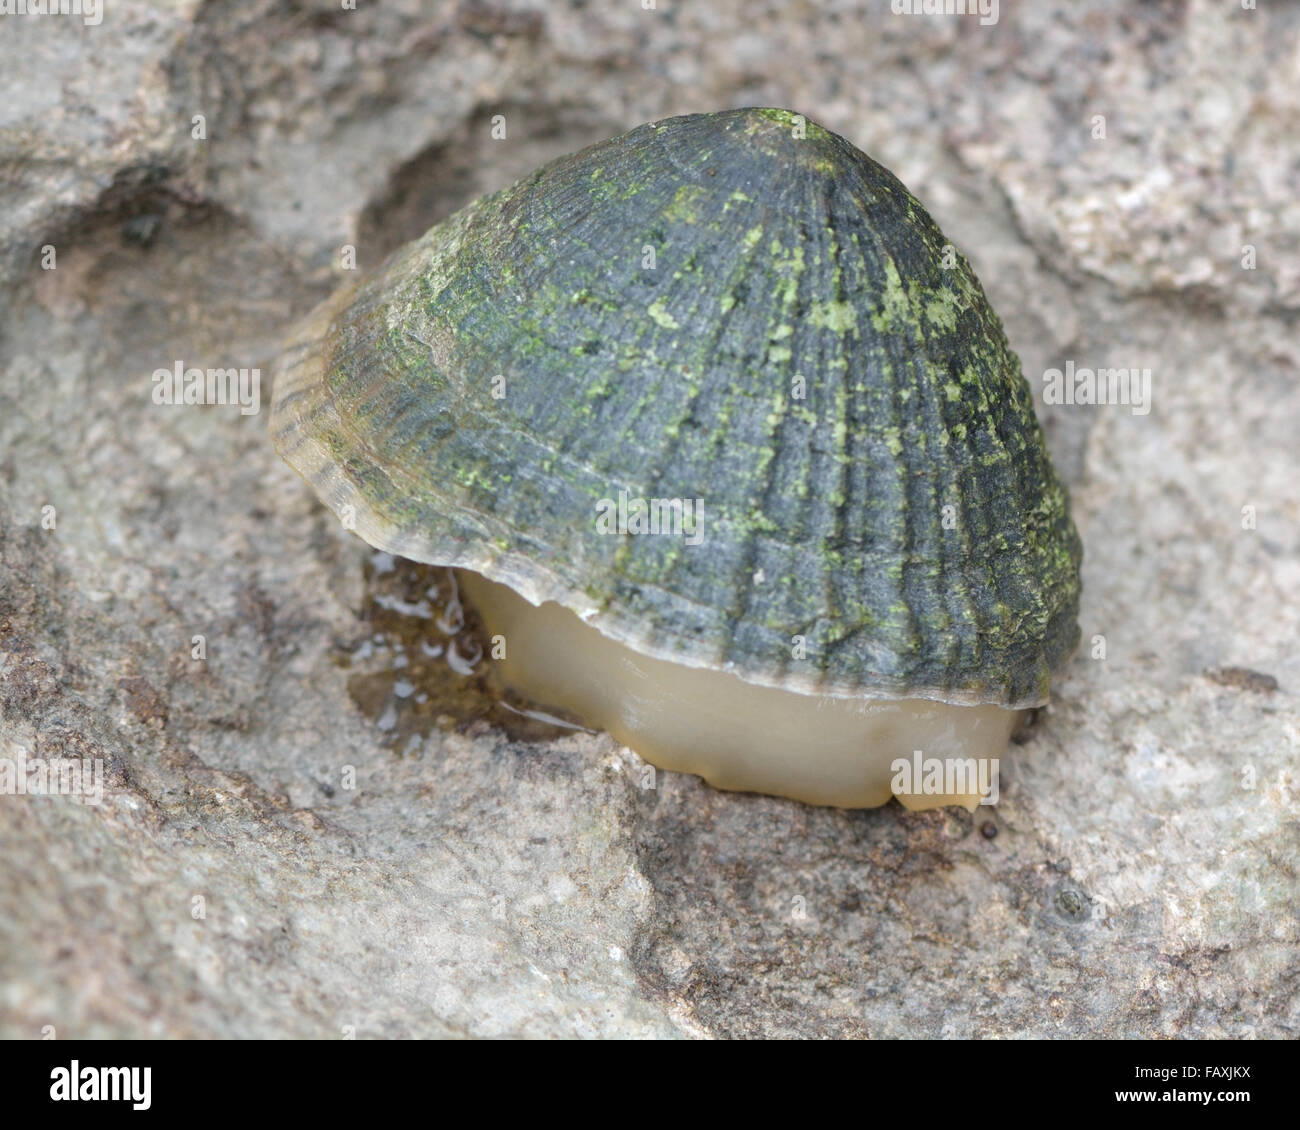 Common Limpet (Patella vulgata) on shore with foot exposed. A gastropod mollusc on rock, with trail of slime visible Stock Photo